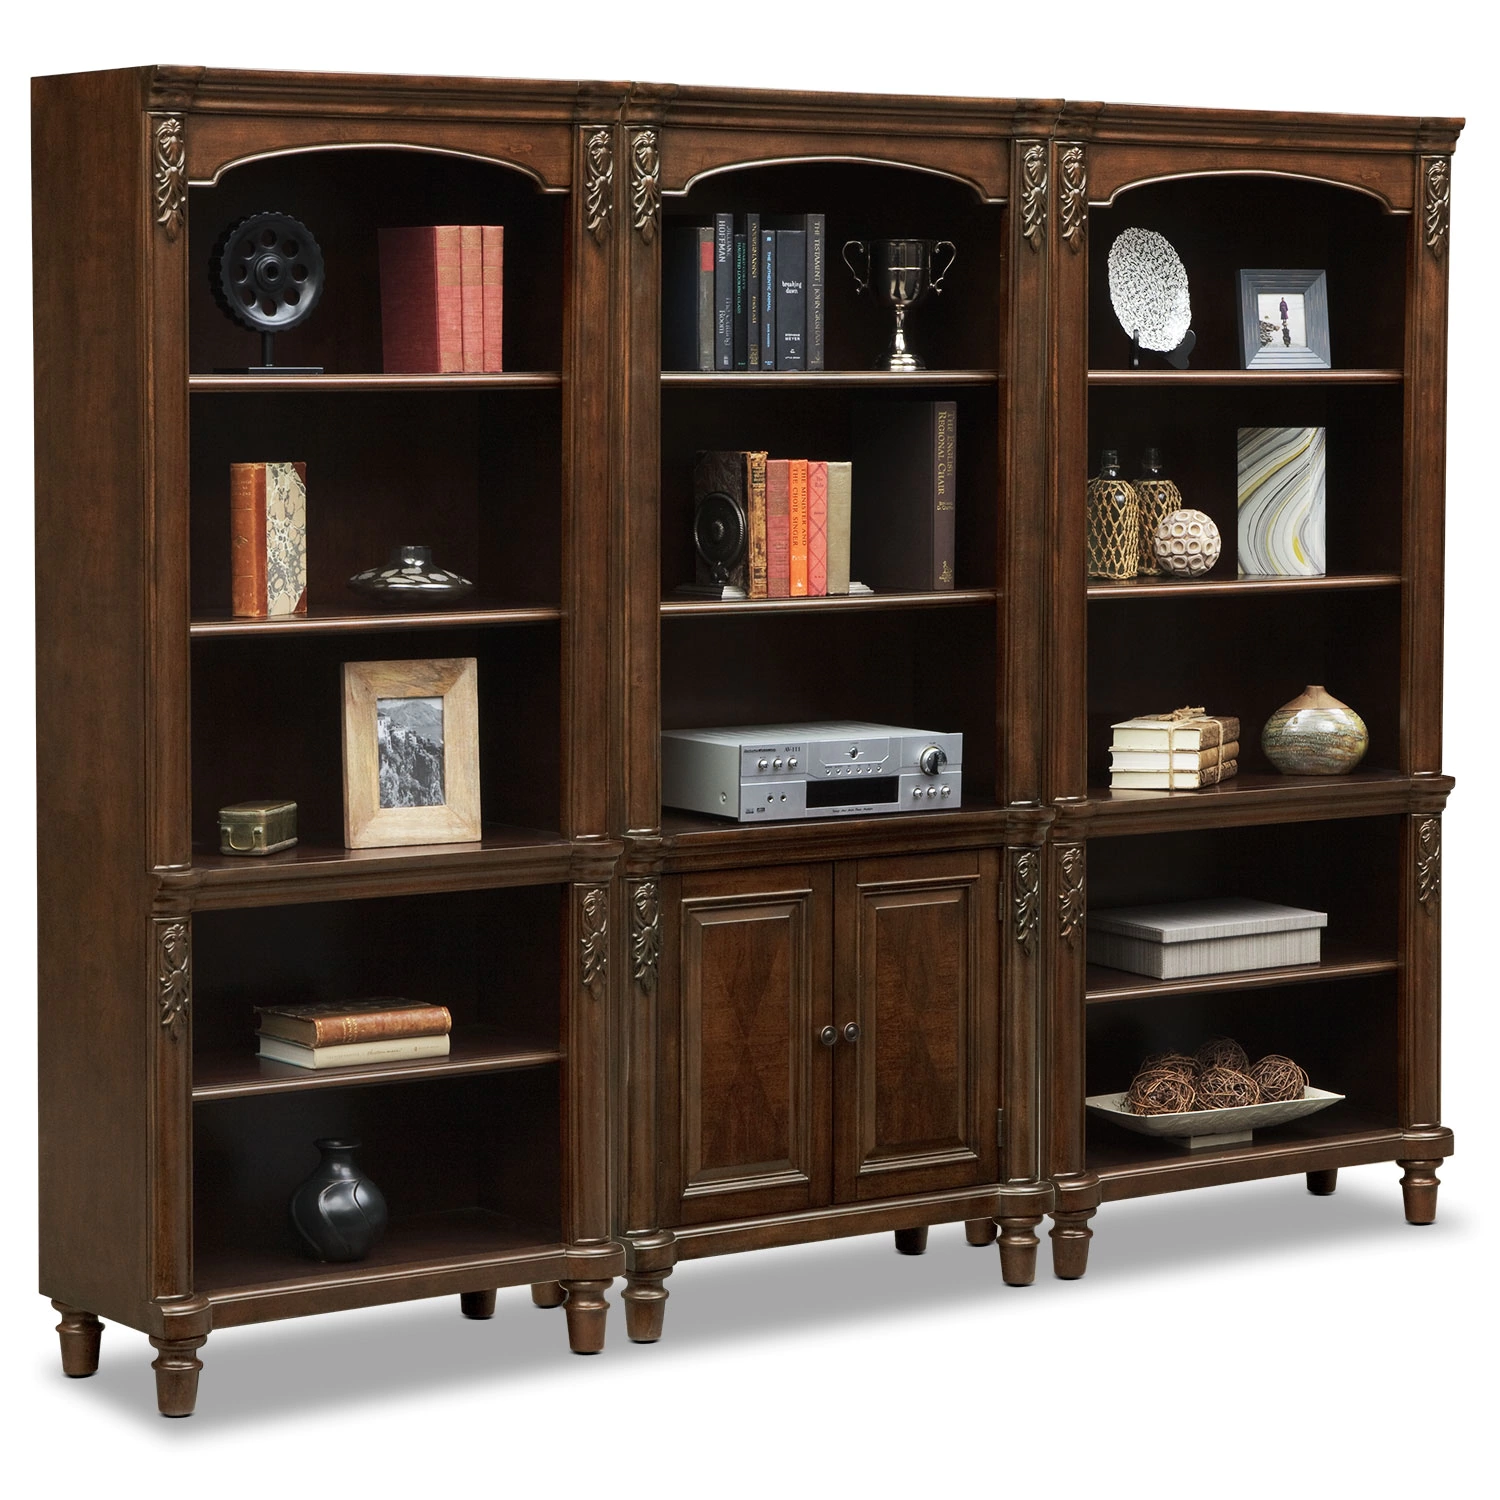 accent bookcases value city cherry corner table tap change ashland wall bookcase decorative boxes with lids modern furniture for small spaces brass coffee glass top oak bedside